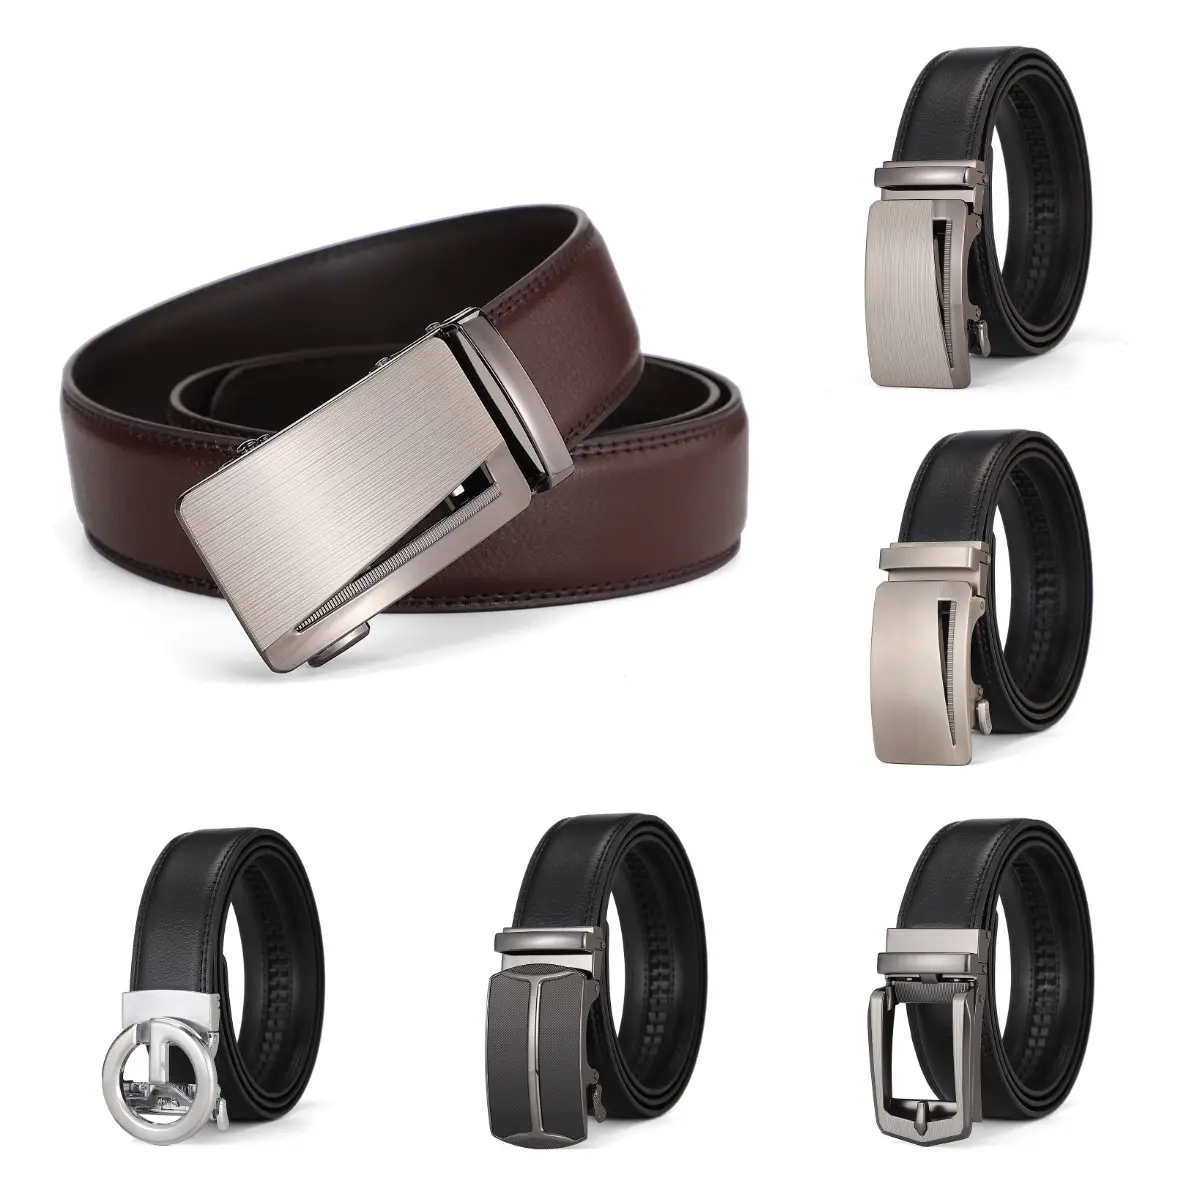 Men's Casual Fashion Cowhide Leather Belt with Fine Automatic Buckle Custom Length Durable and for Gift Giving to Friends